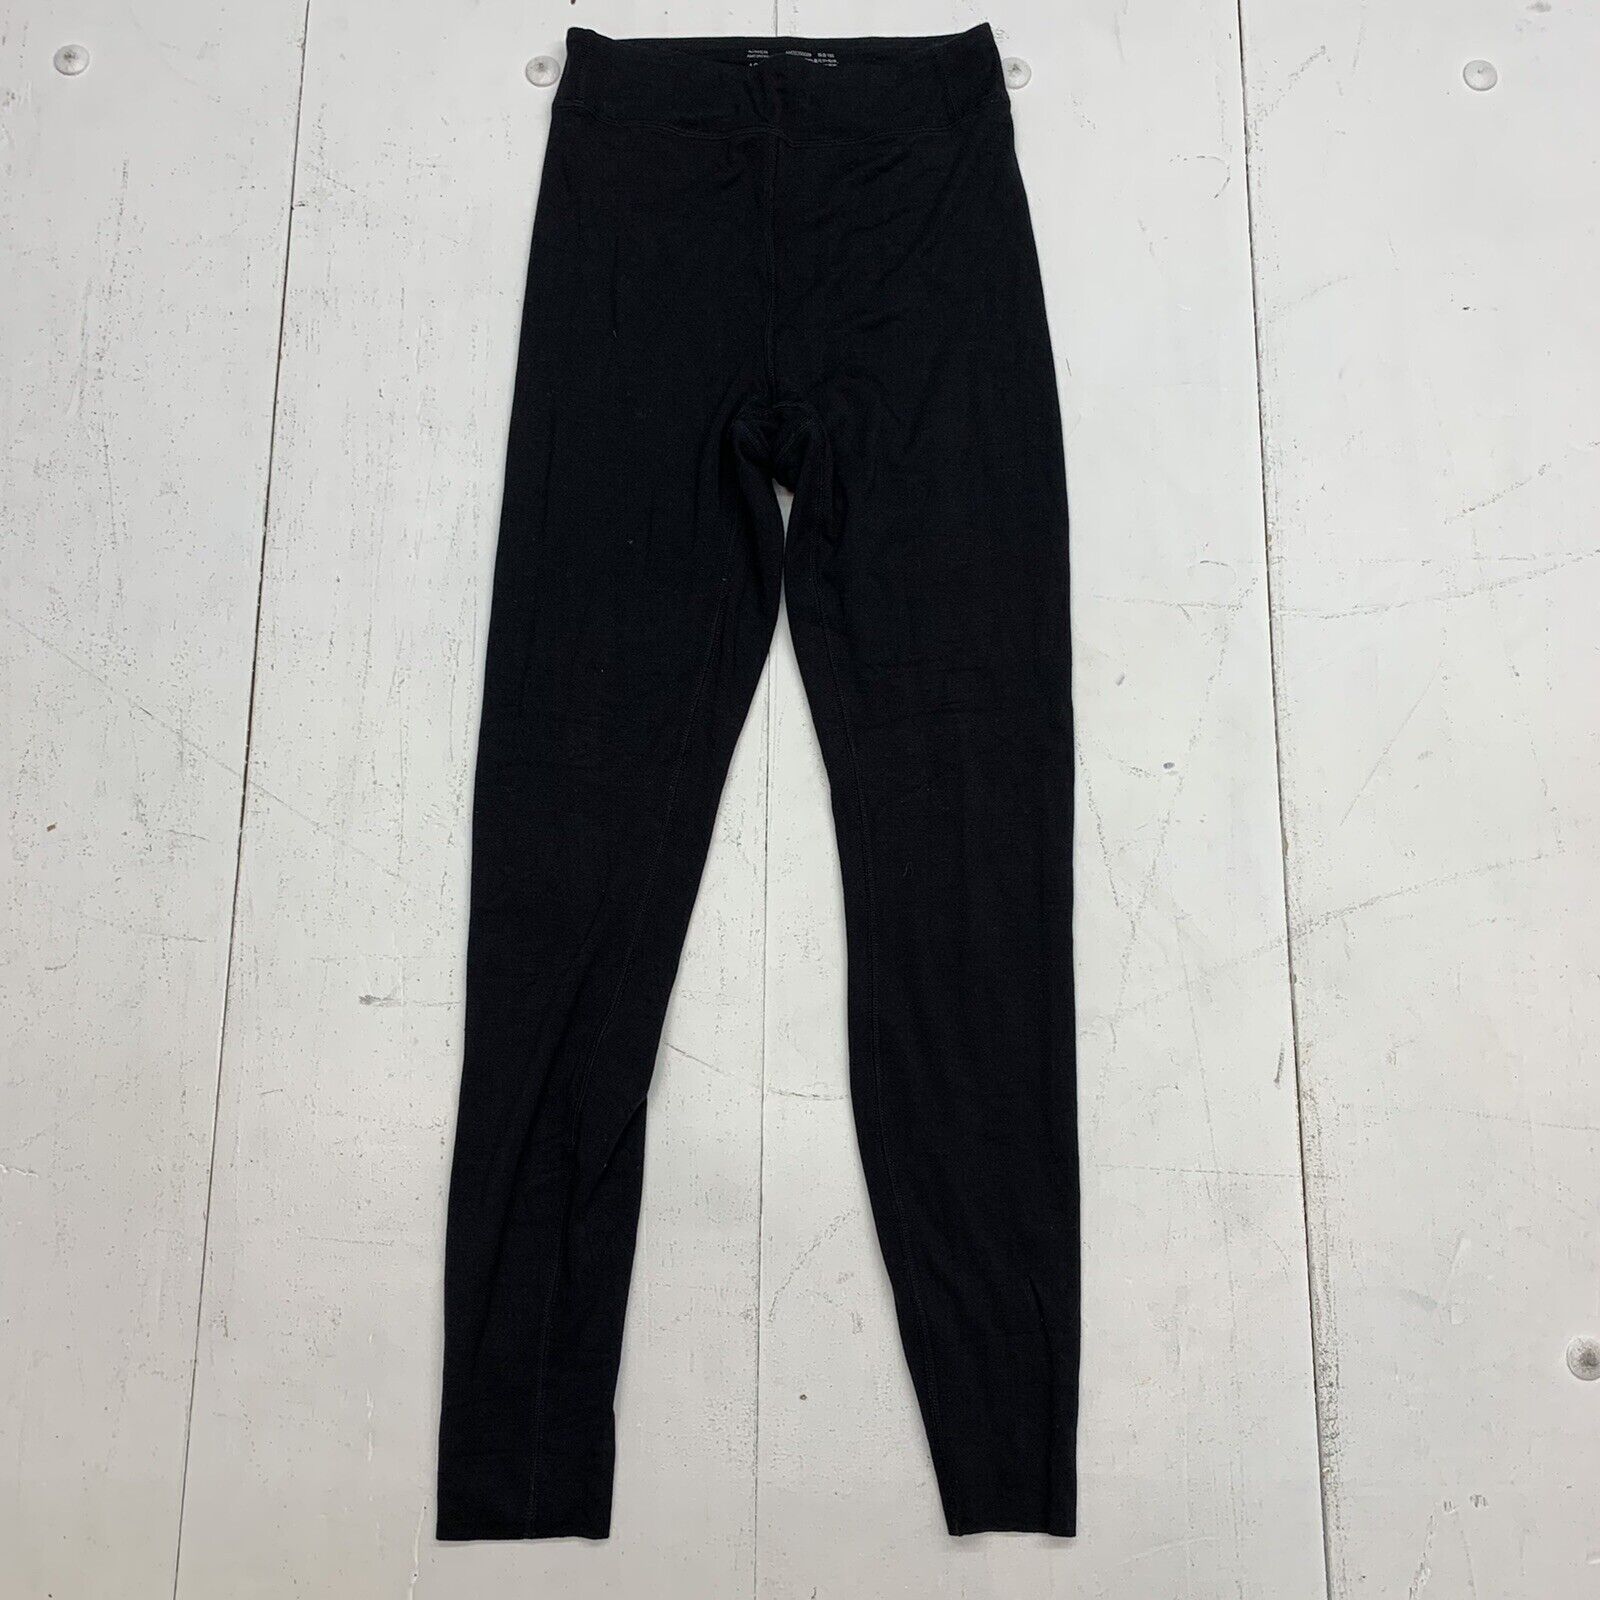 Under Armour Black leggings Womens Size Small